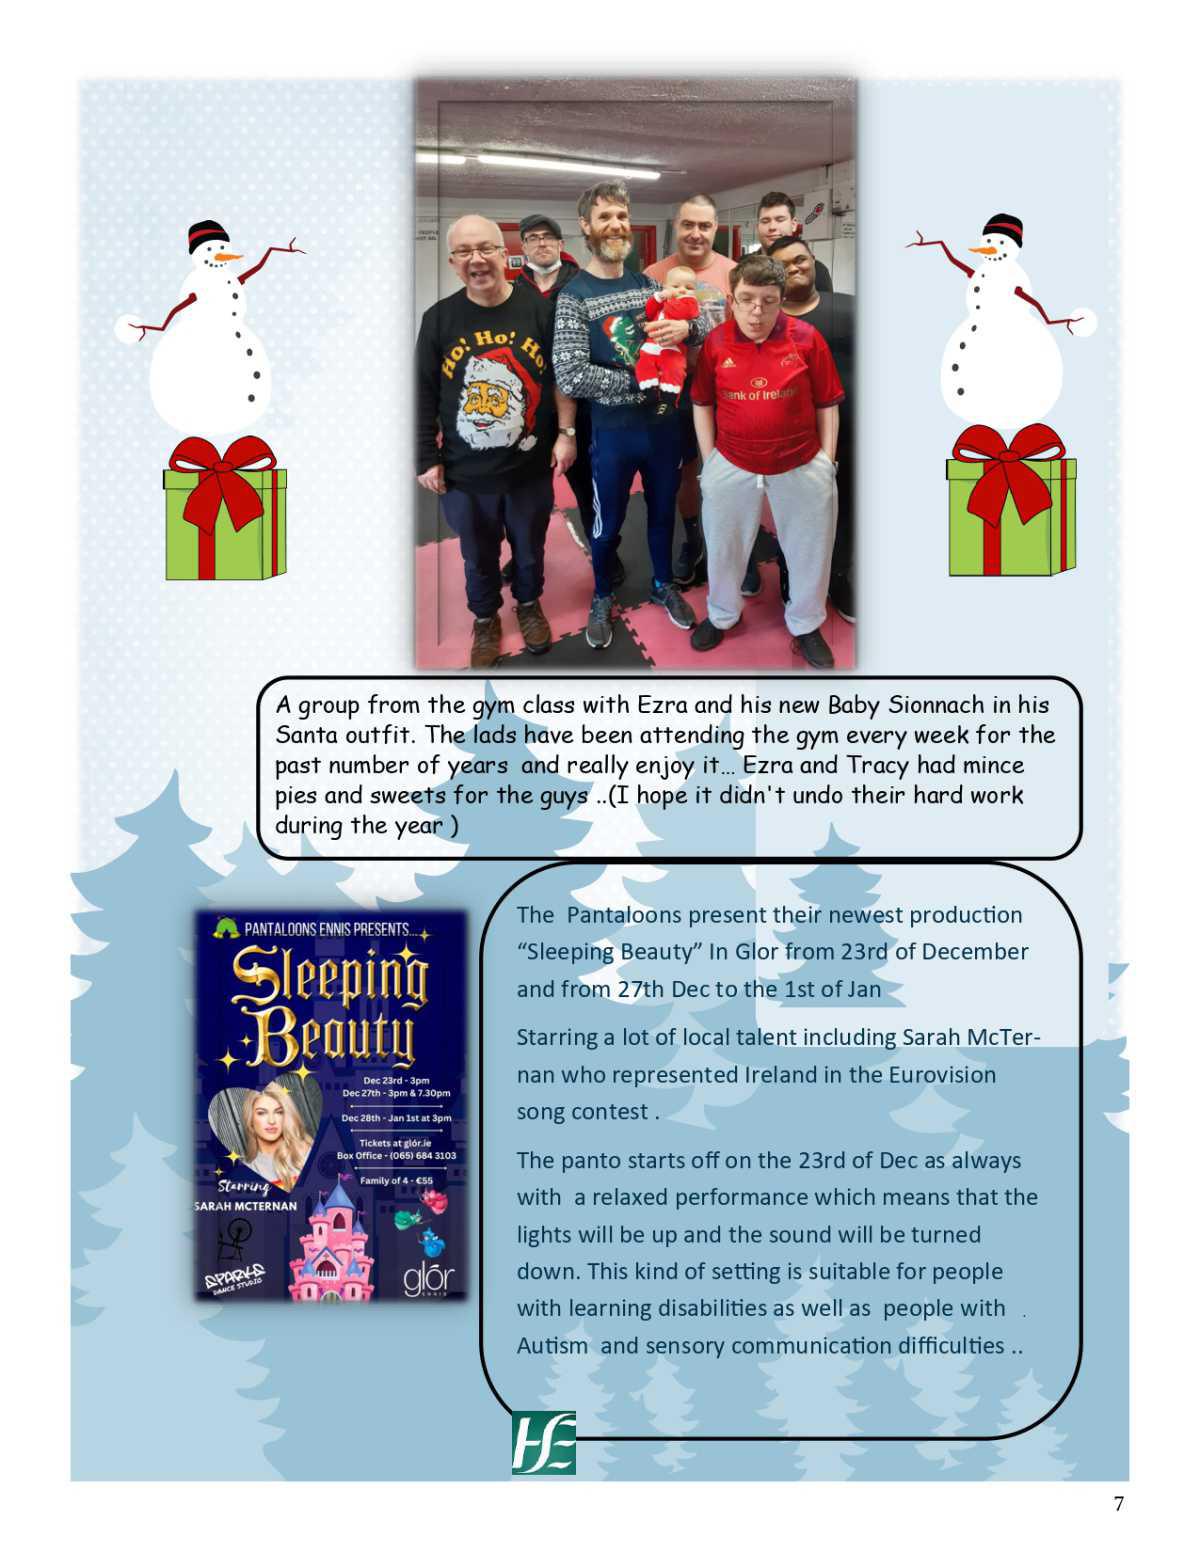 Dulick Newsletter Christmas Special 2022